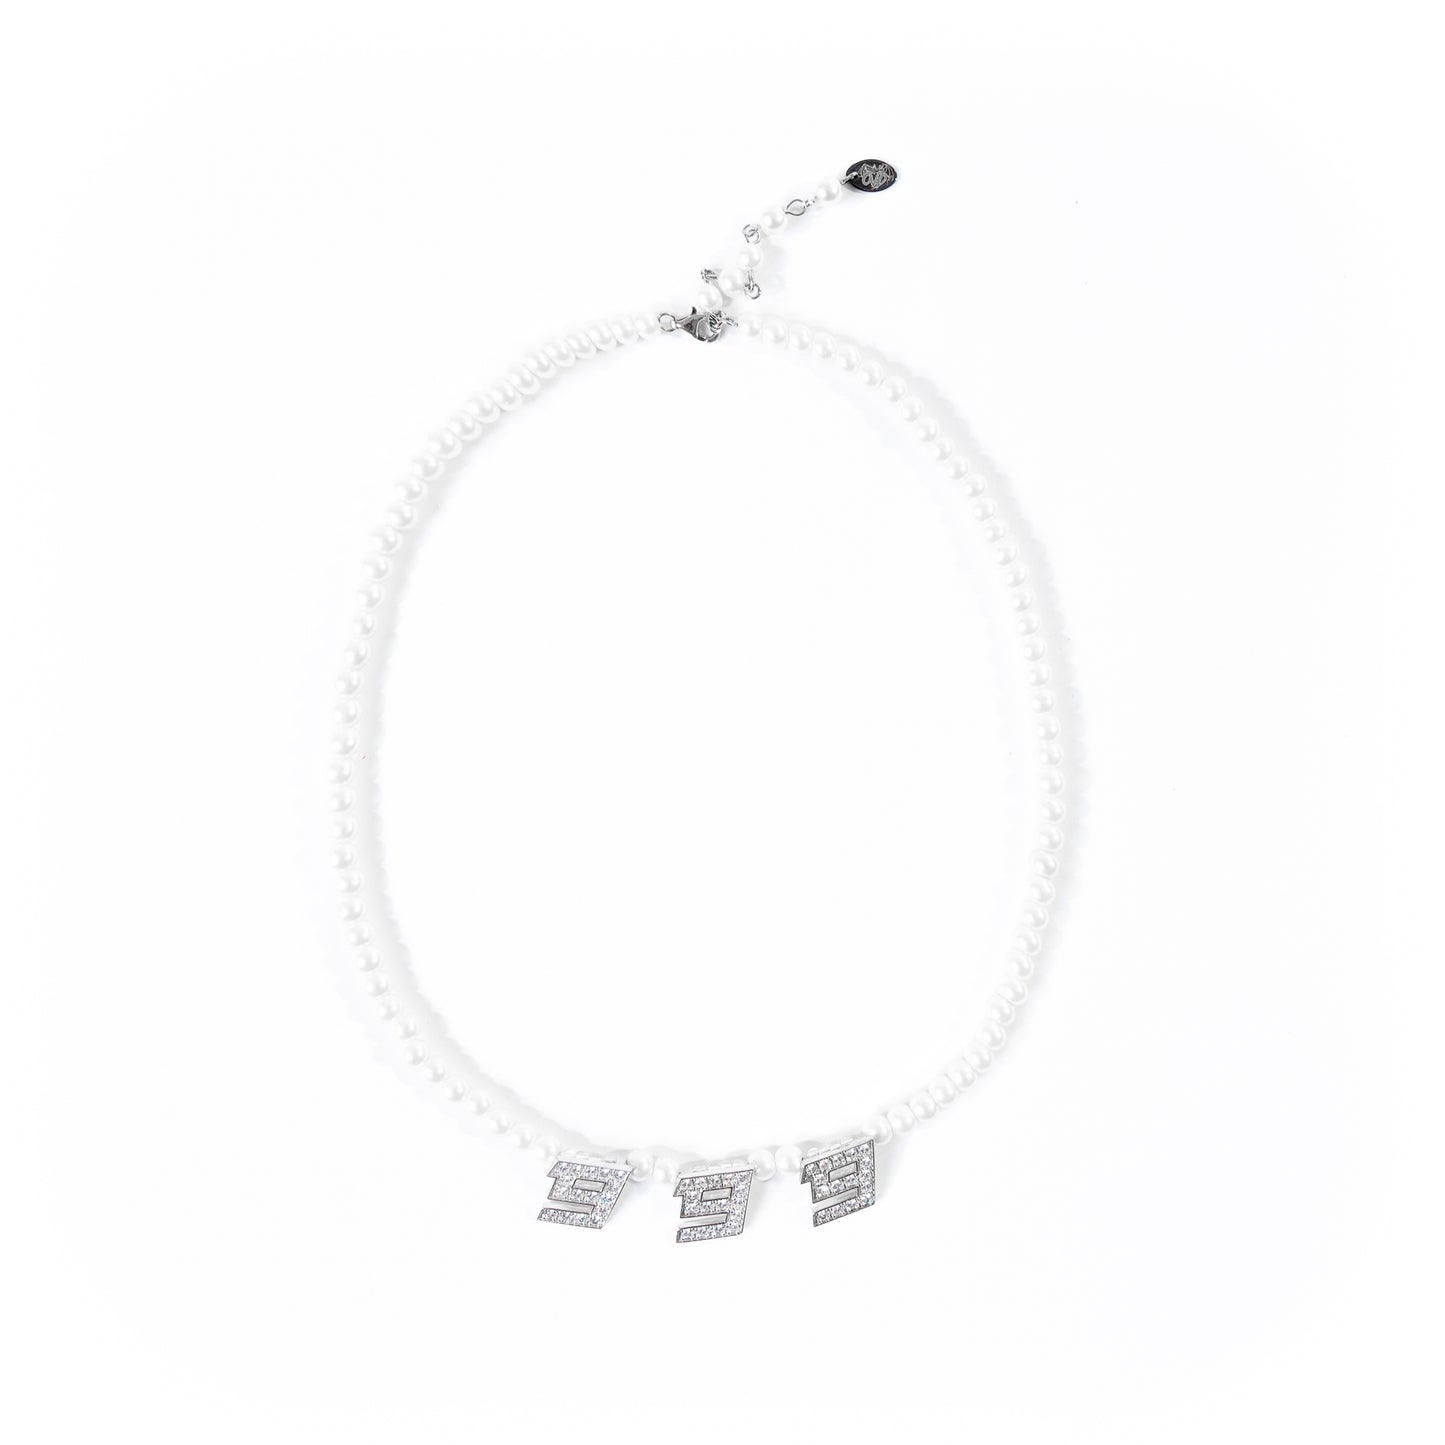 "999" PEARL NECKLACE